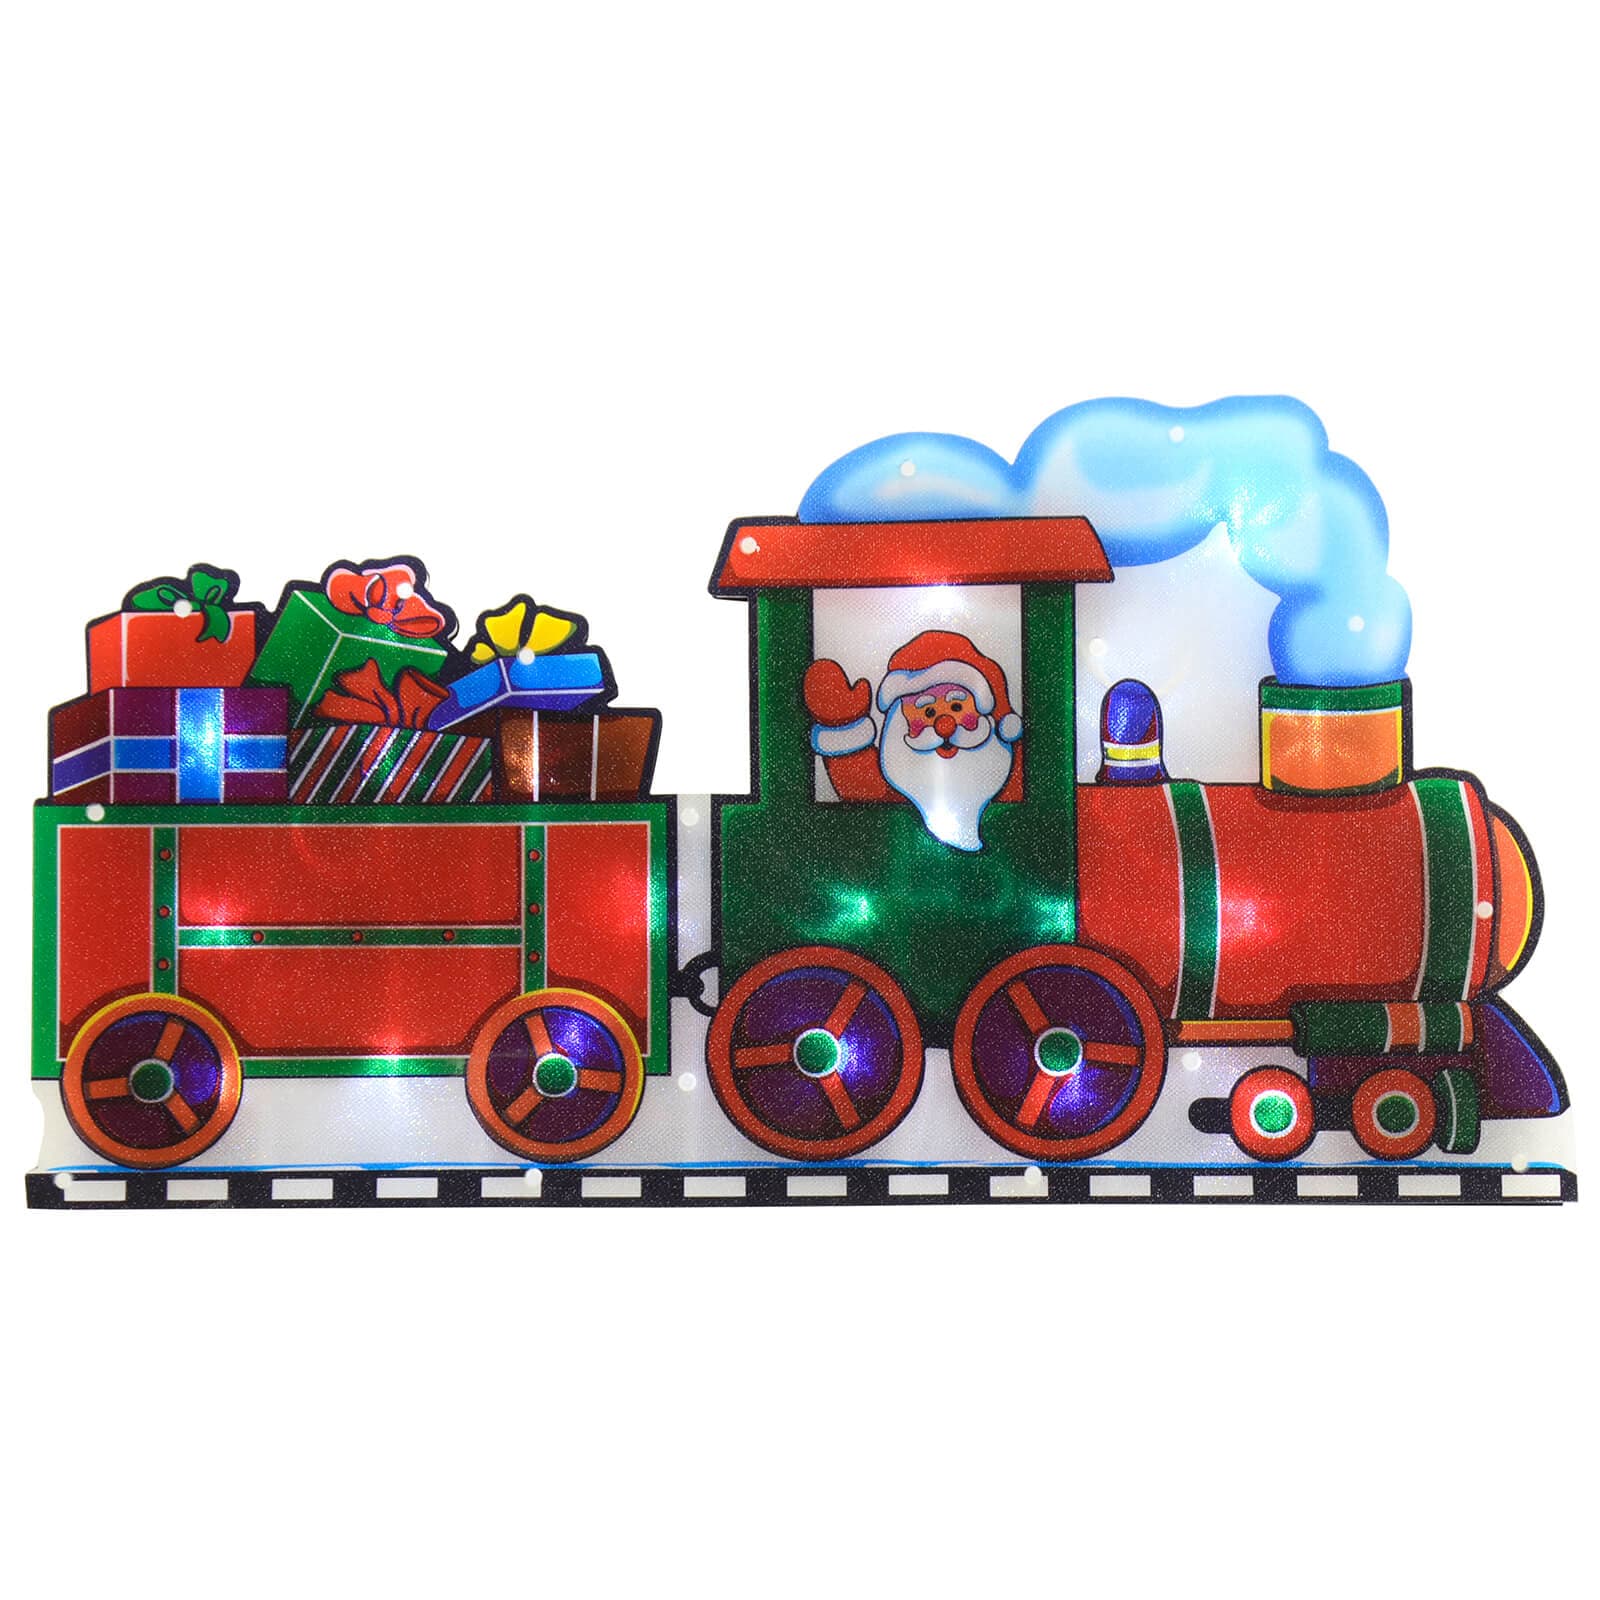 Santa waving from a train with a truck full of Christmas gifts, light up window silhouette LED decoration